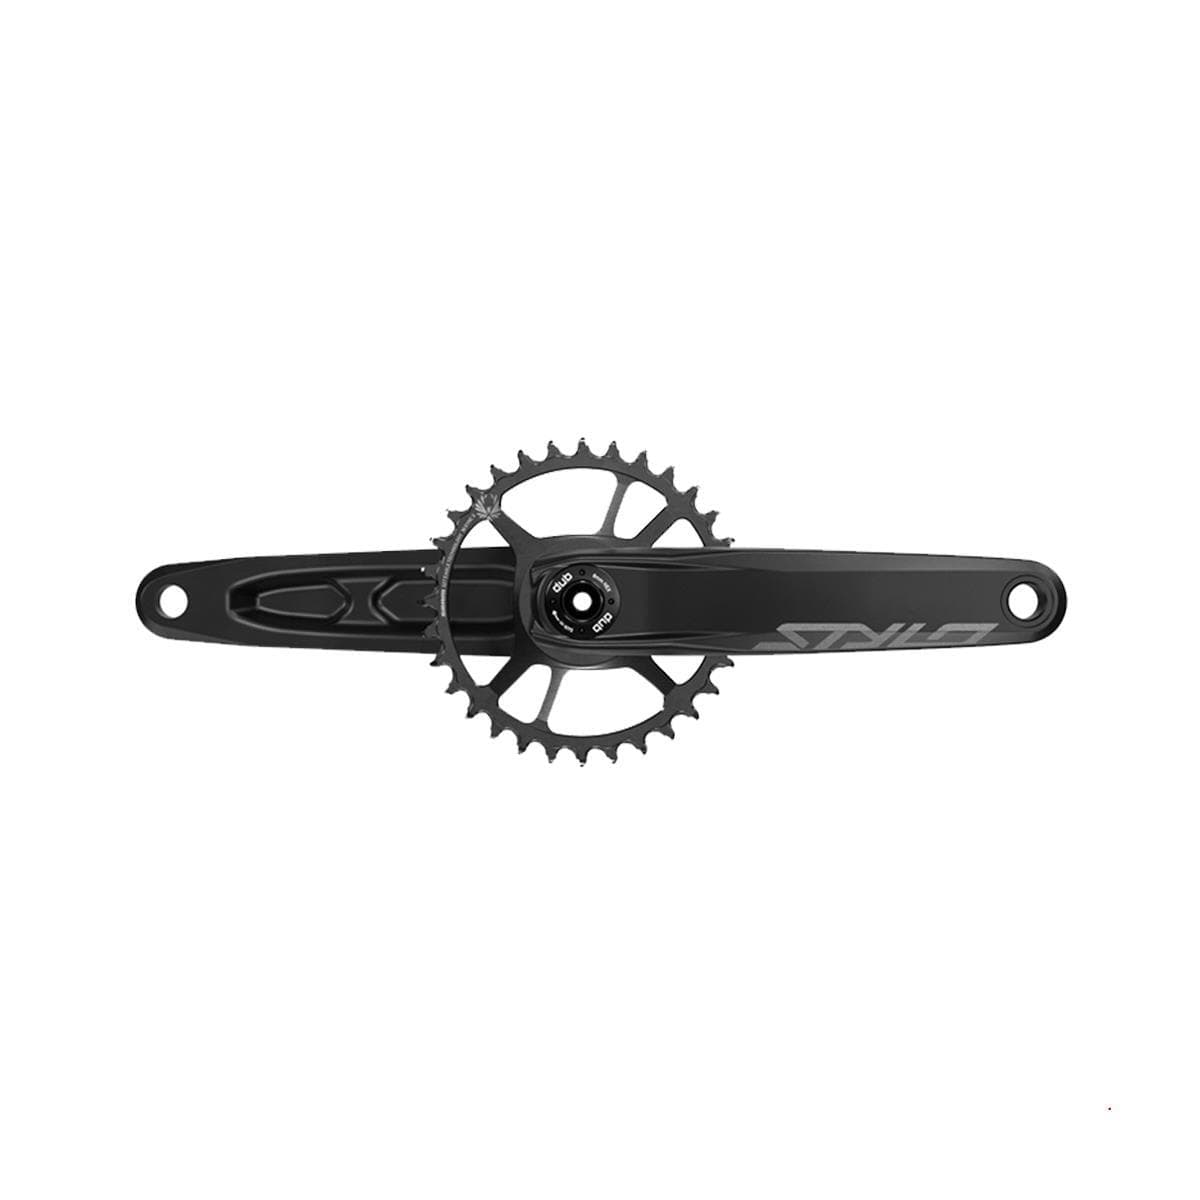 Truvativ Crank Stylo 6K Aluminum Eagle Cannondale-Ai Dub 12S With Direct Mount 32T X-Sync 2 Chainring Black (Dub Cups/Bearings Not Included): Black 170Mm